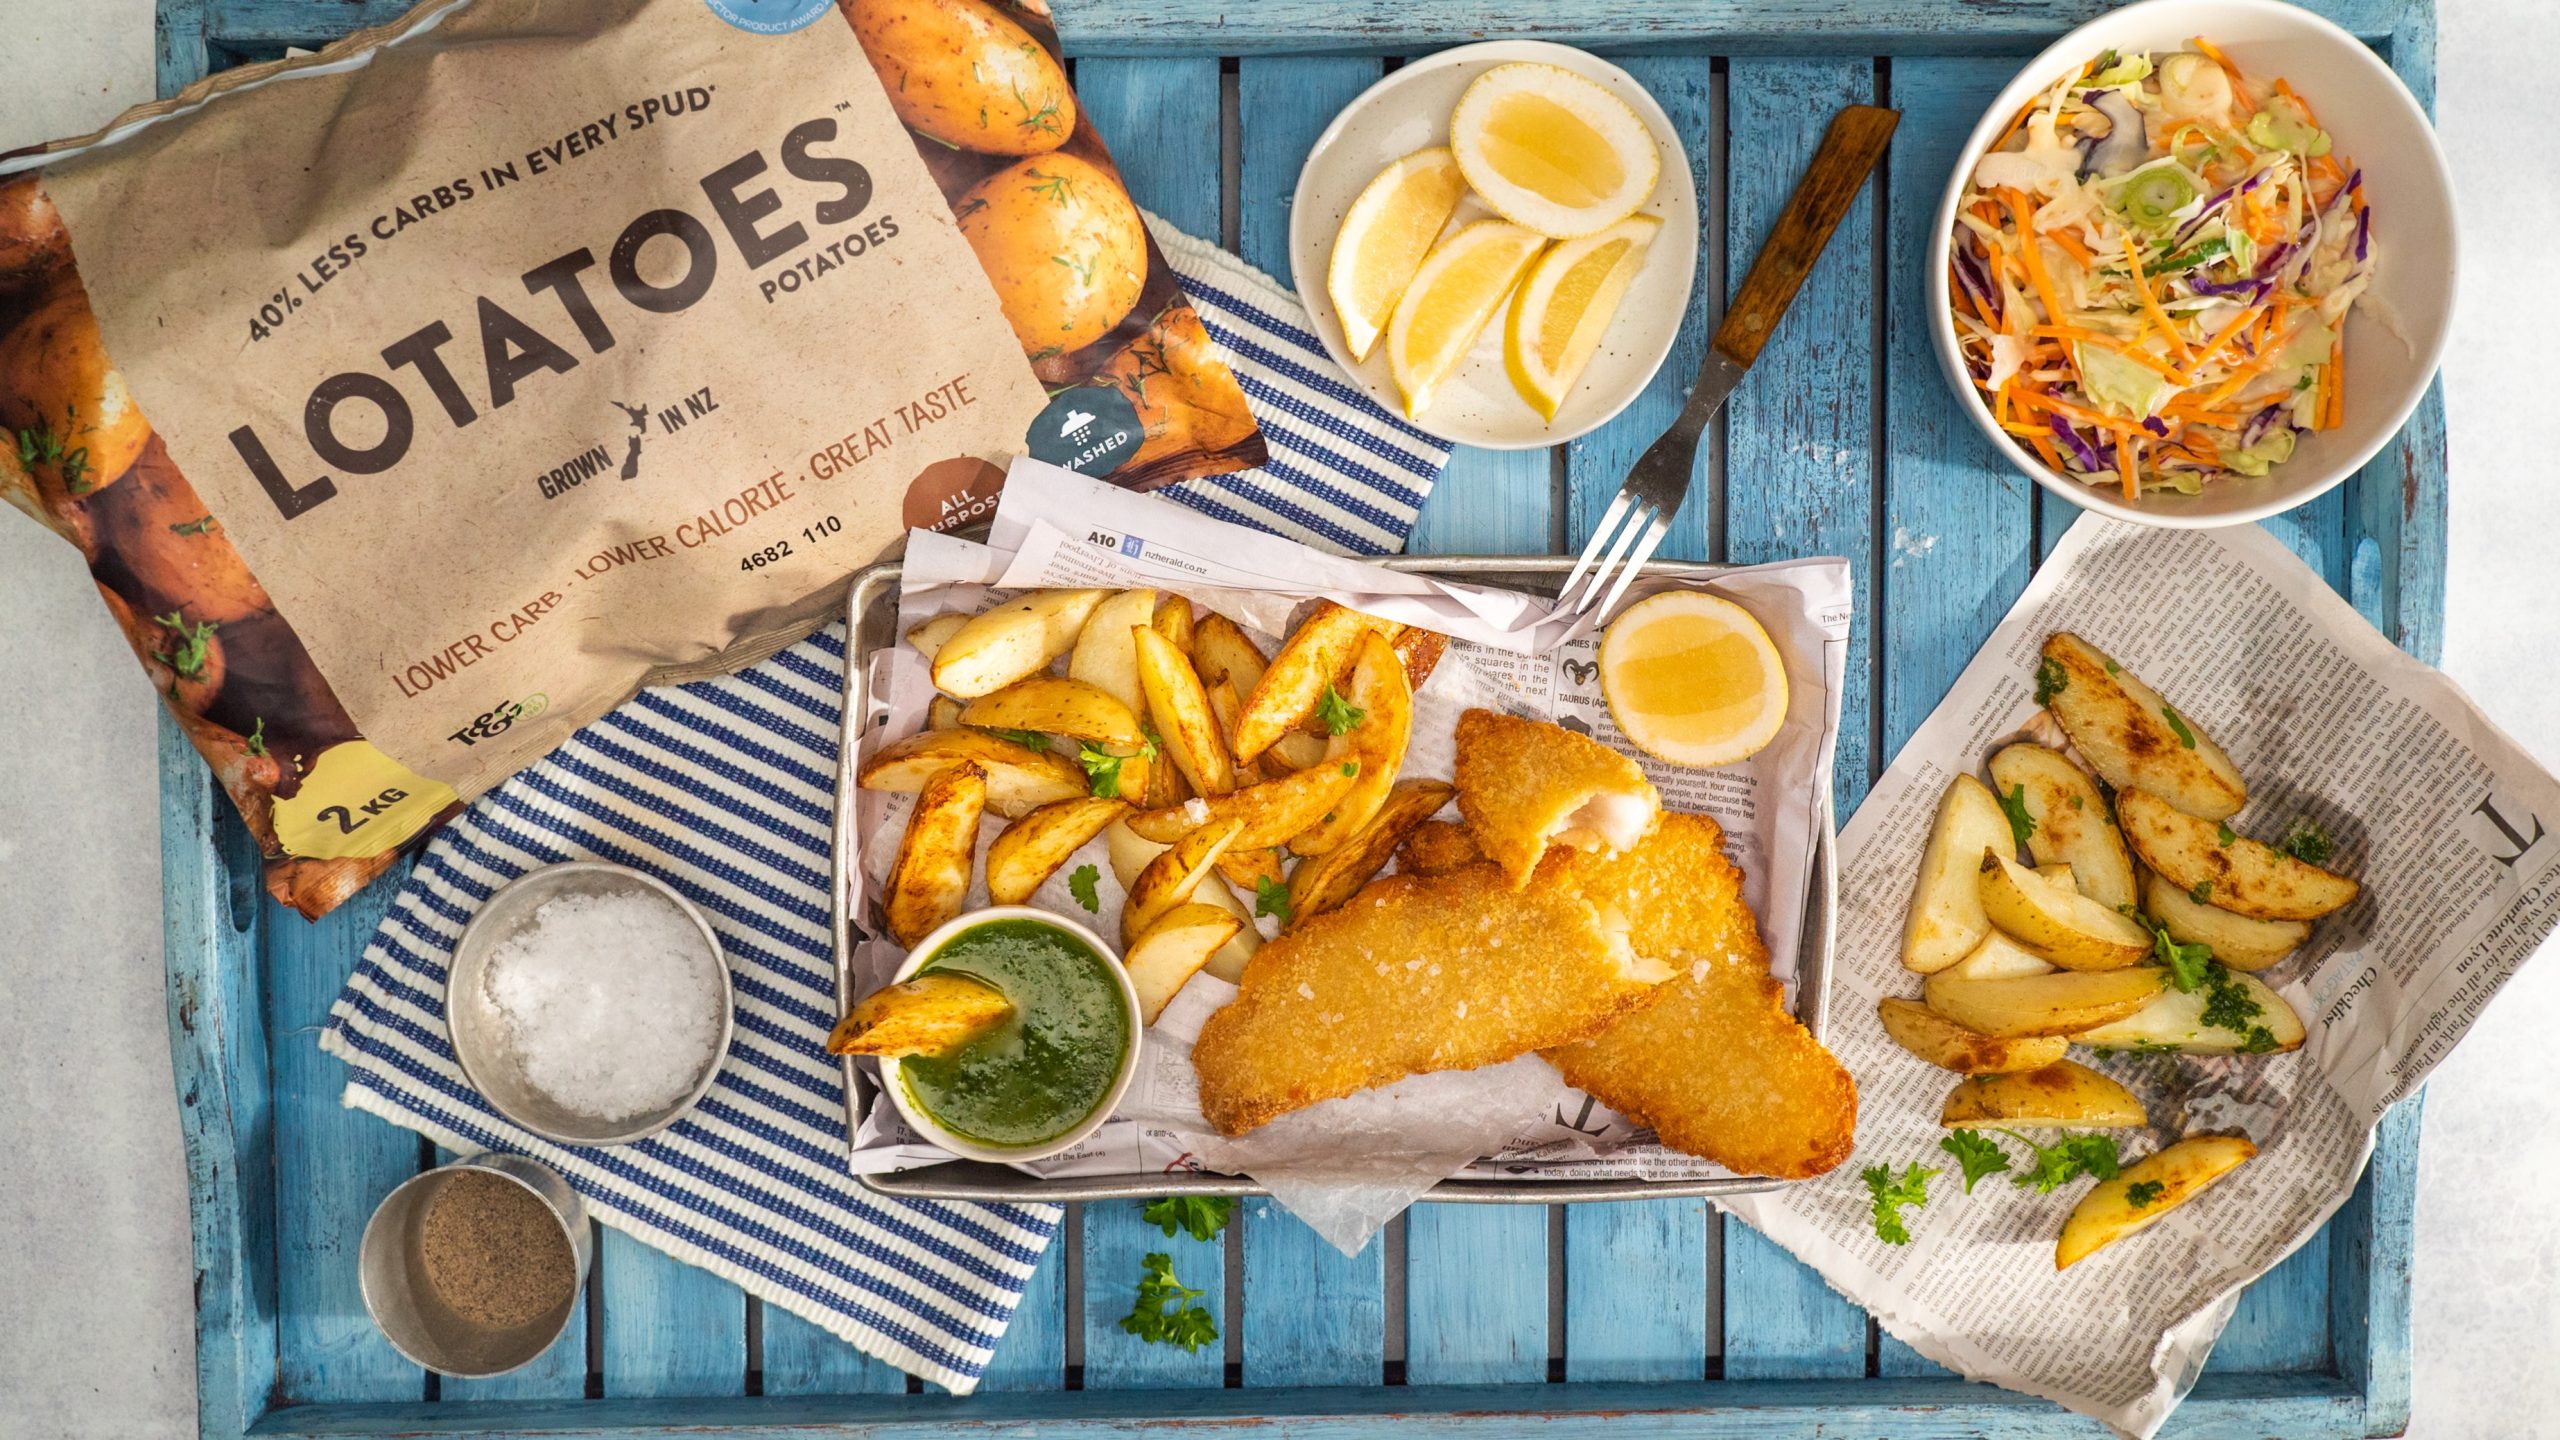 How to make air fryer potato wedges - crumbed fish fillets, potato wedges and herb sauce on a tray with packet of Lotatoes